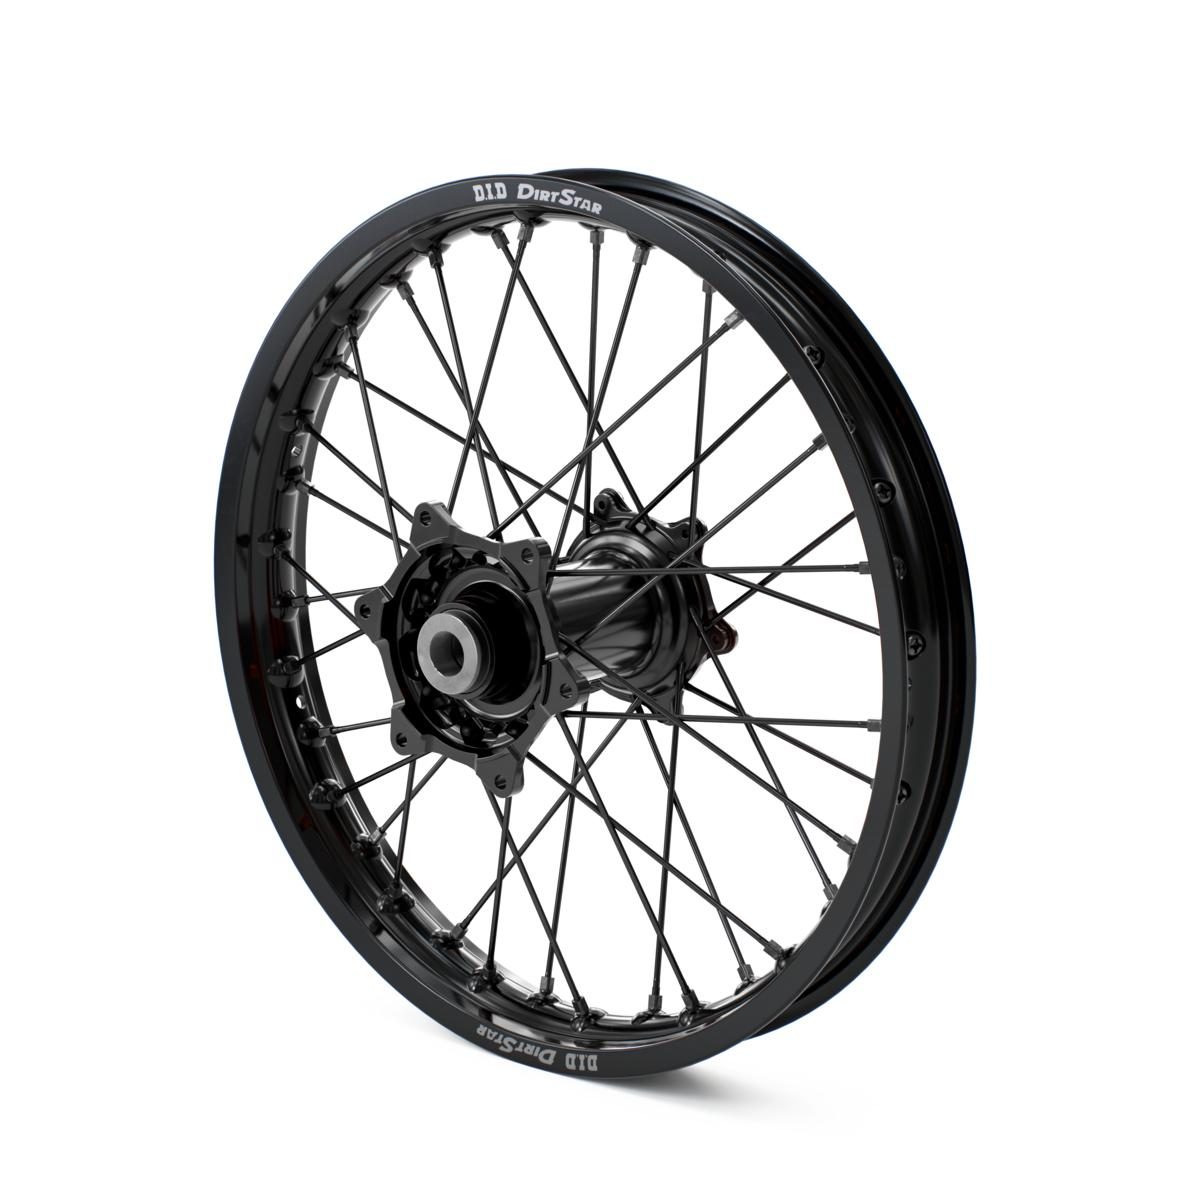 Factory front wheel 21